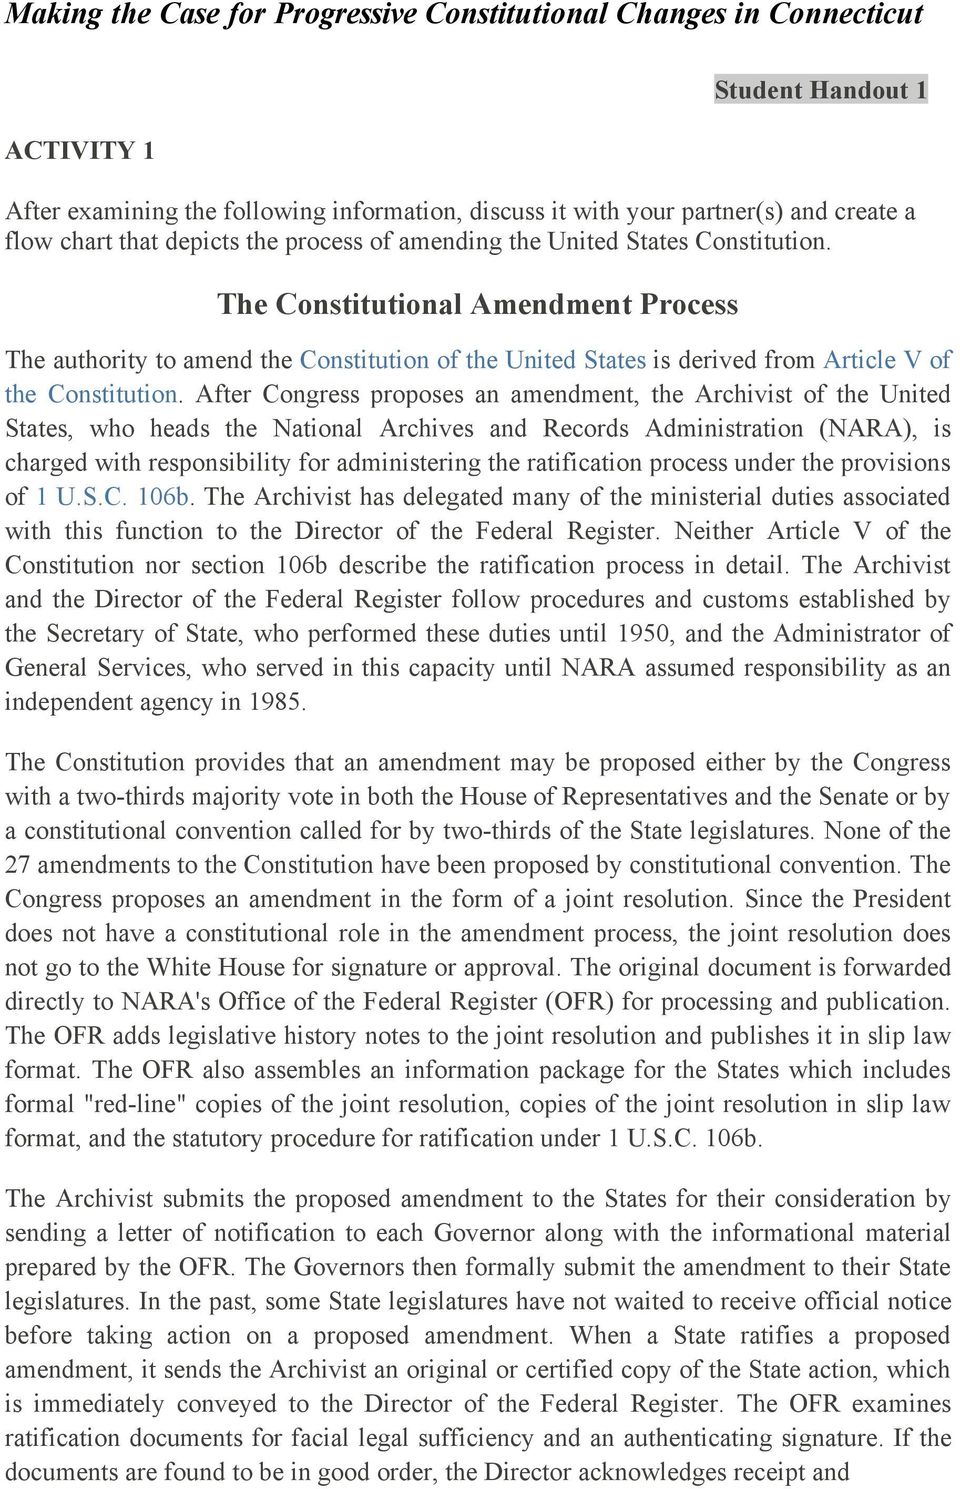 After Congress proposes an amendment, the Archivist of the United States, who heads the National Archives and Records Administration (NARA), is charged with responsibility for administering the